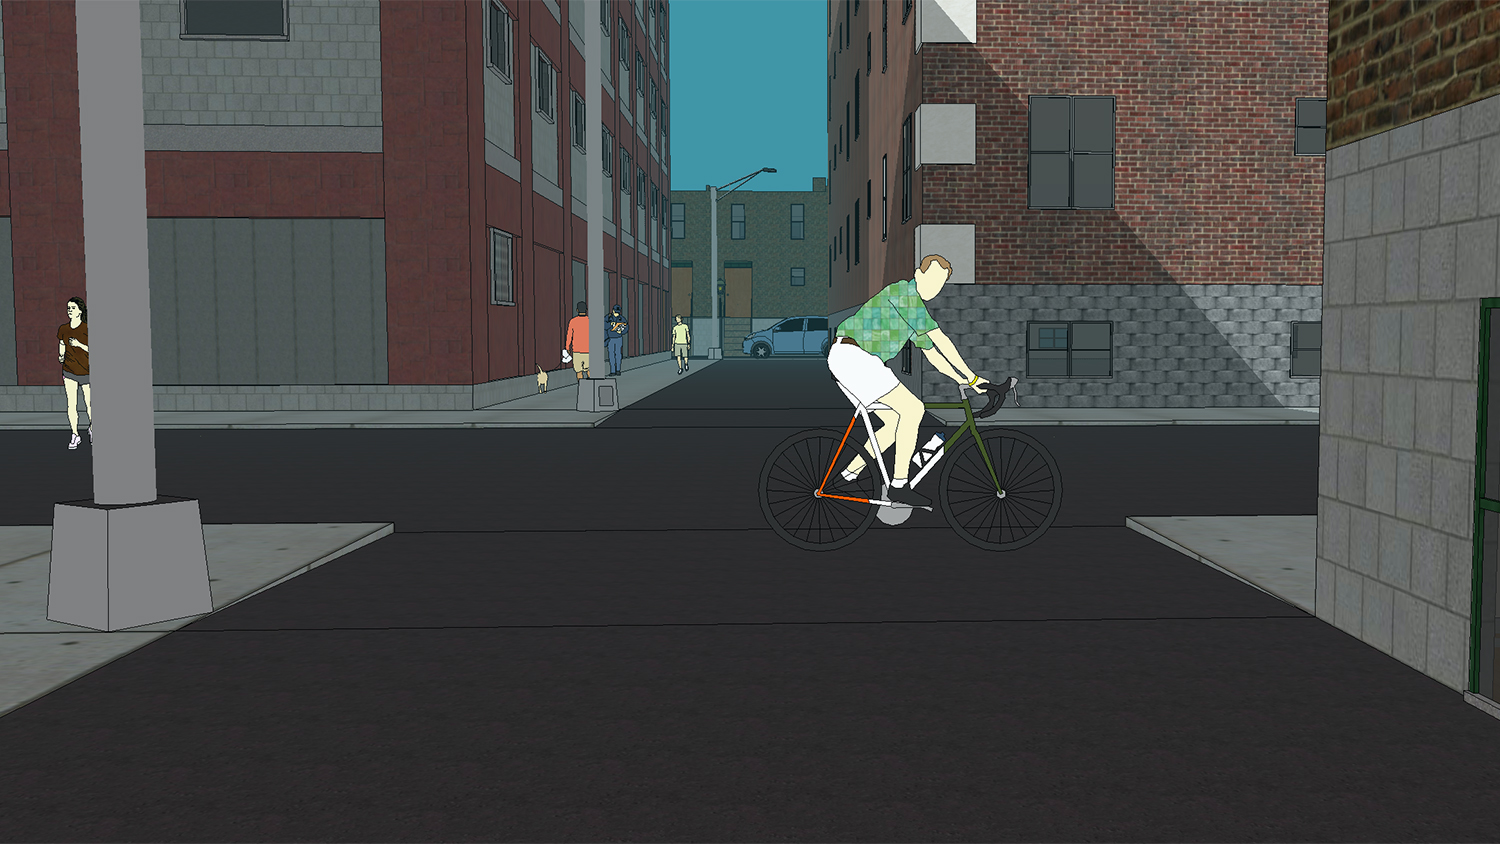 computer image of a street intersection with a bicyclist straight ahead and a jogger on the left